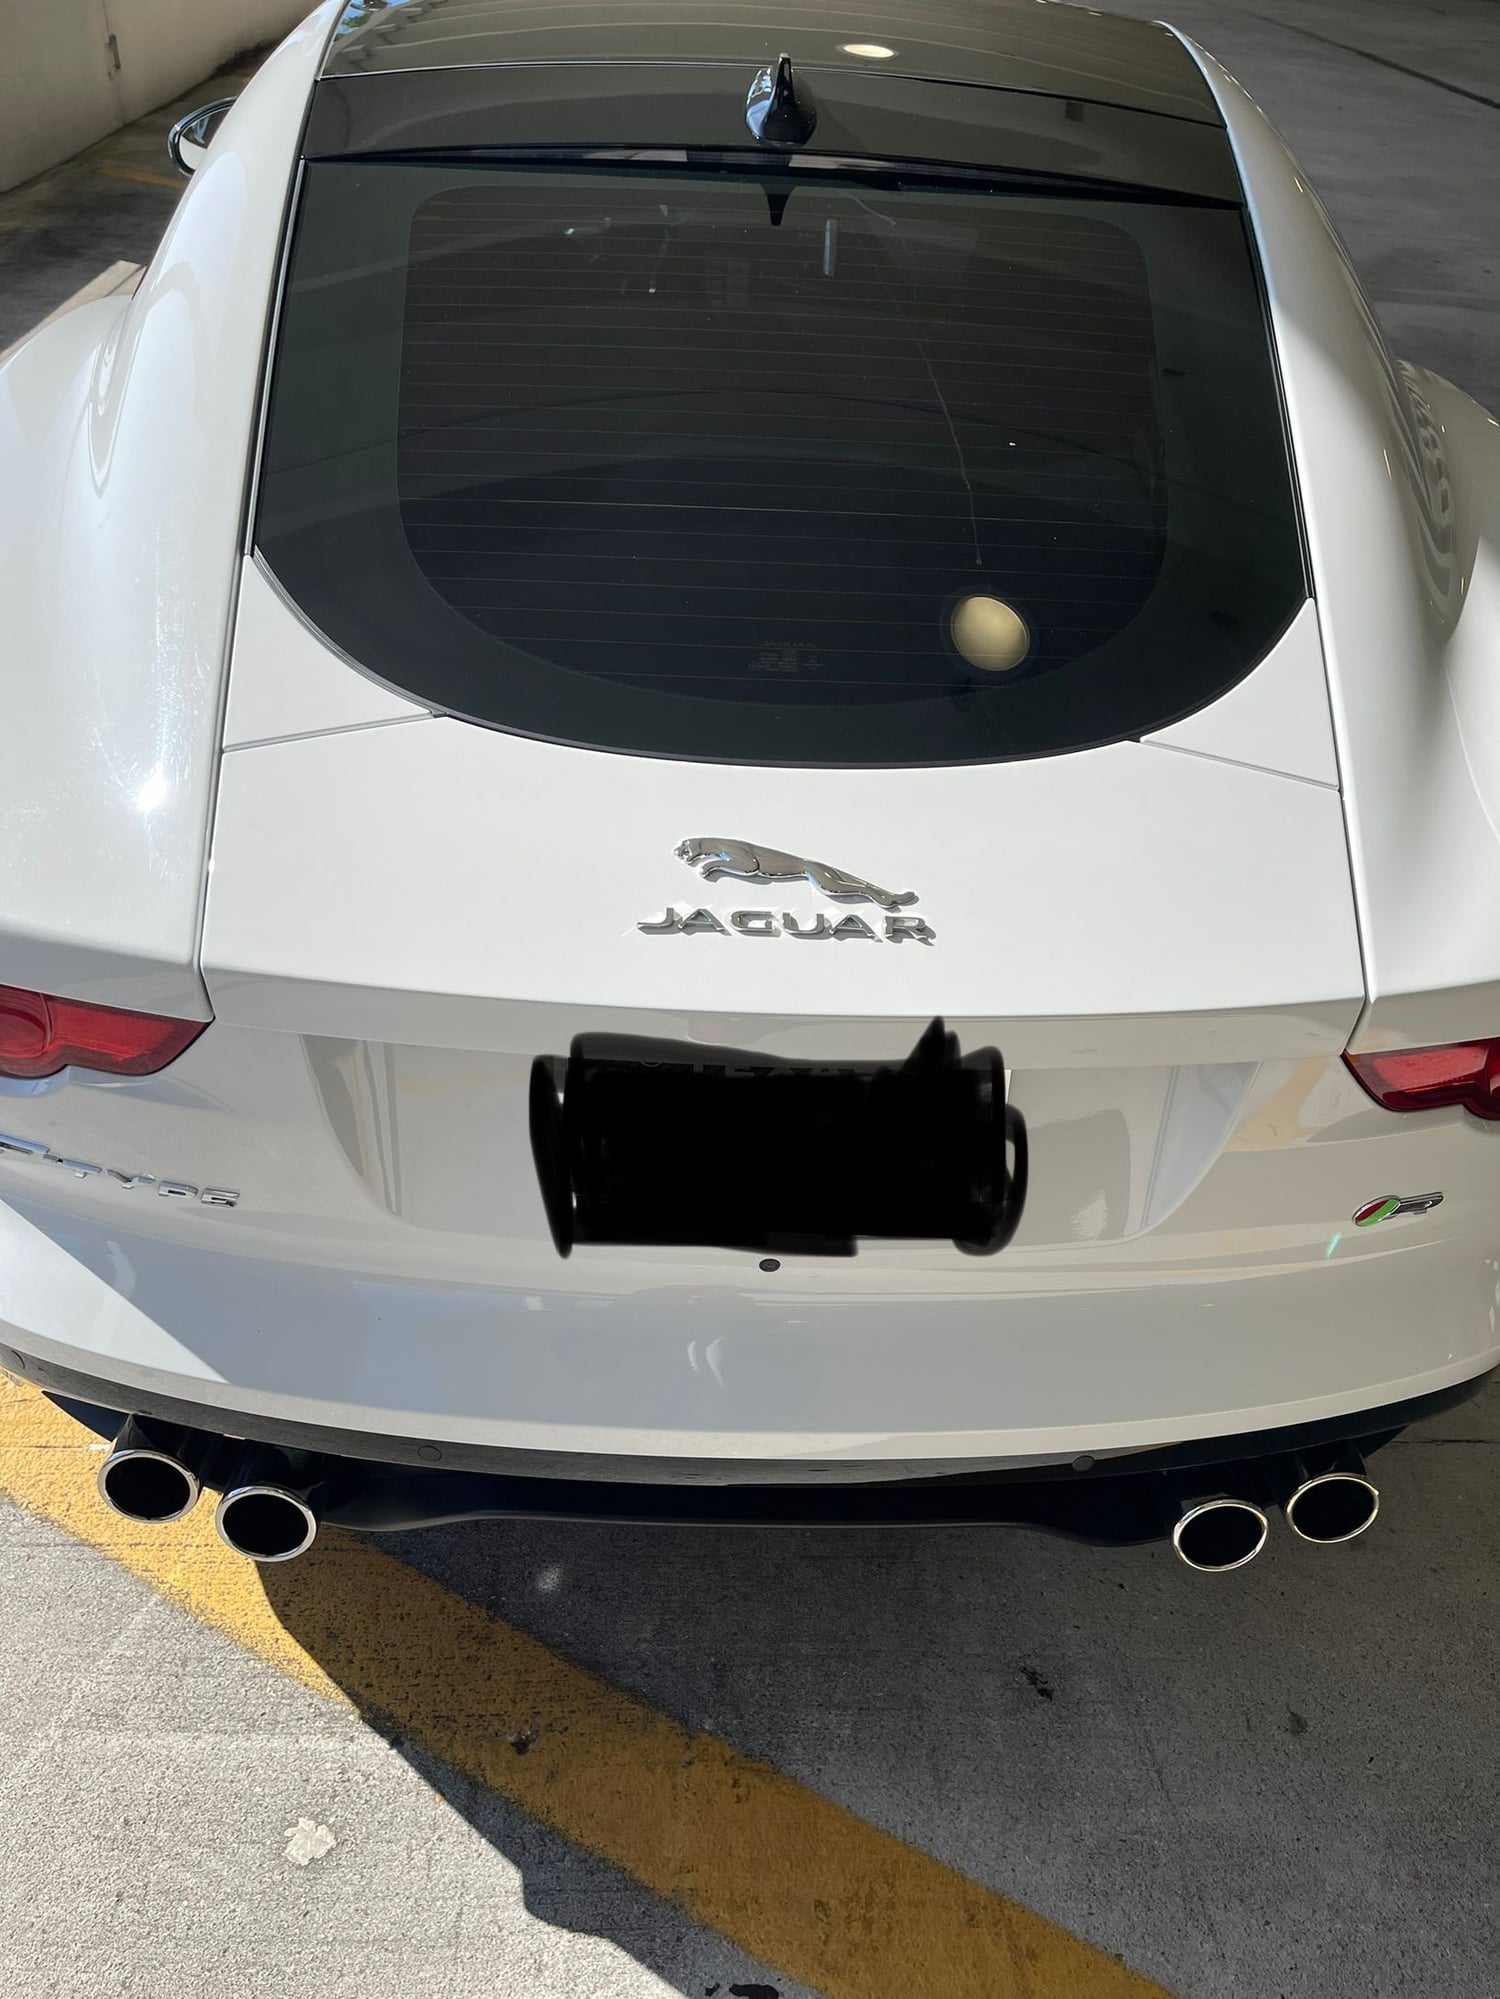 2015 Jaguar F-Type - Excellent 2015 Jaguar F-Type R For Sale - Used - VIN SAJWA6DA5FMK19861 - 11,812 Miles - 8 cyl - 2WD - Automatic - Coupe - White - Houston, TX 77002, United States